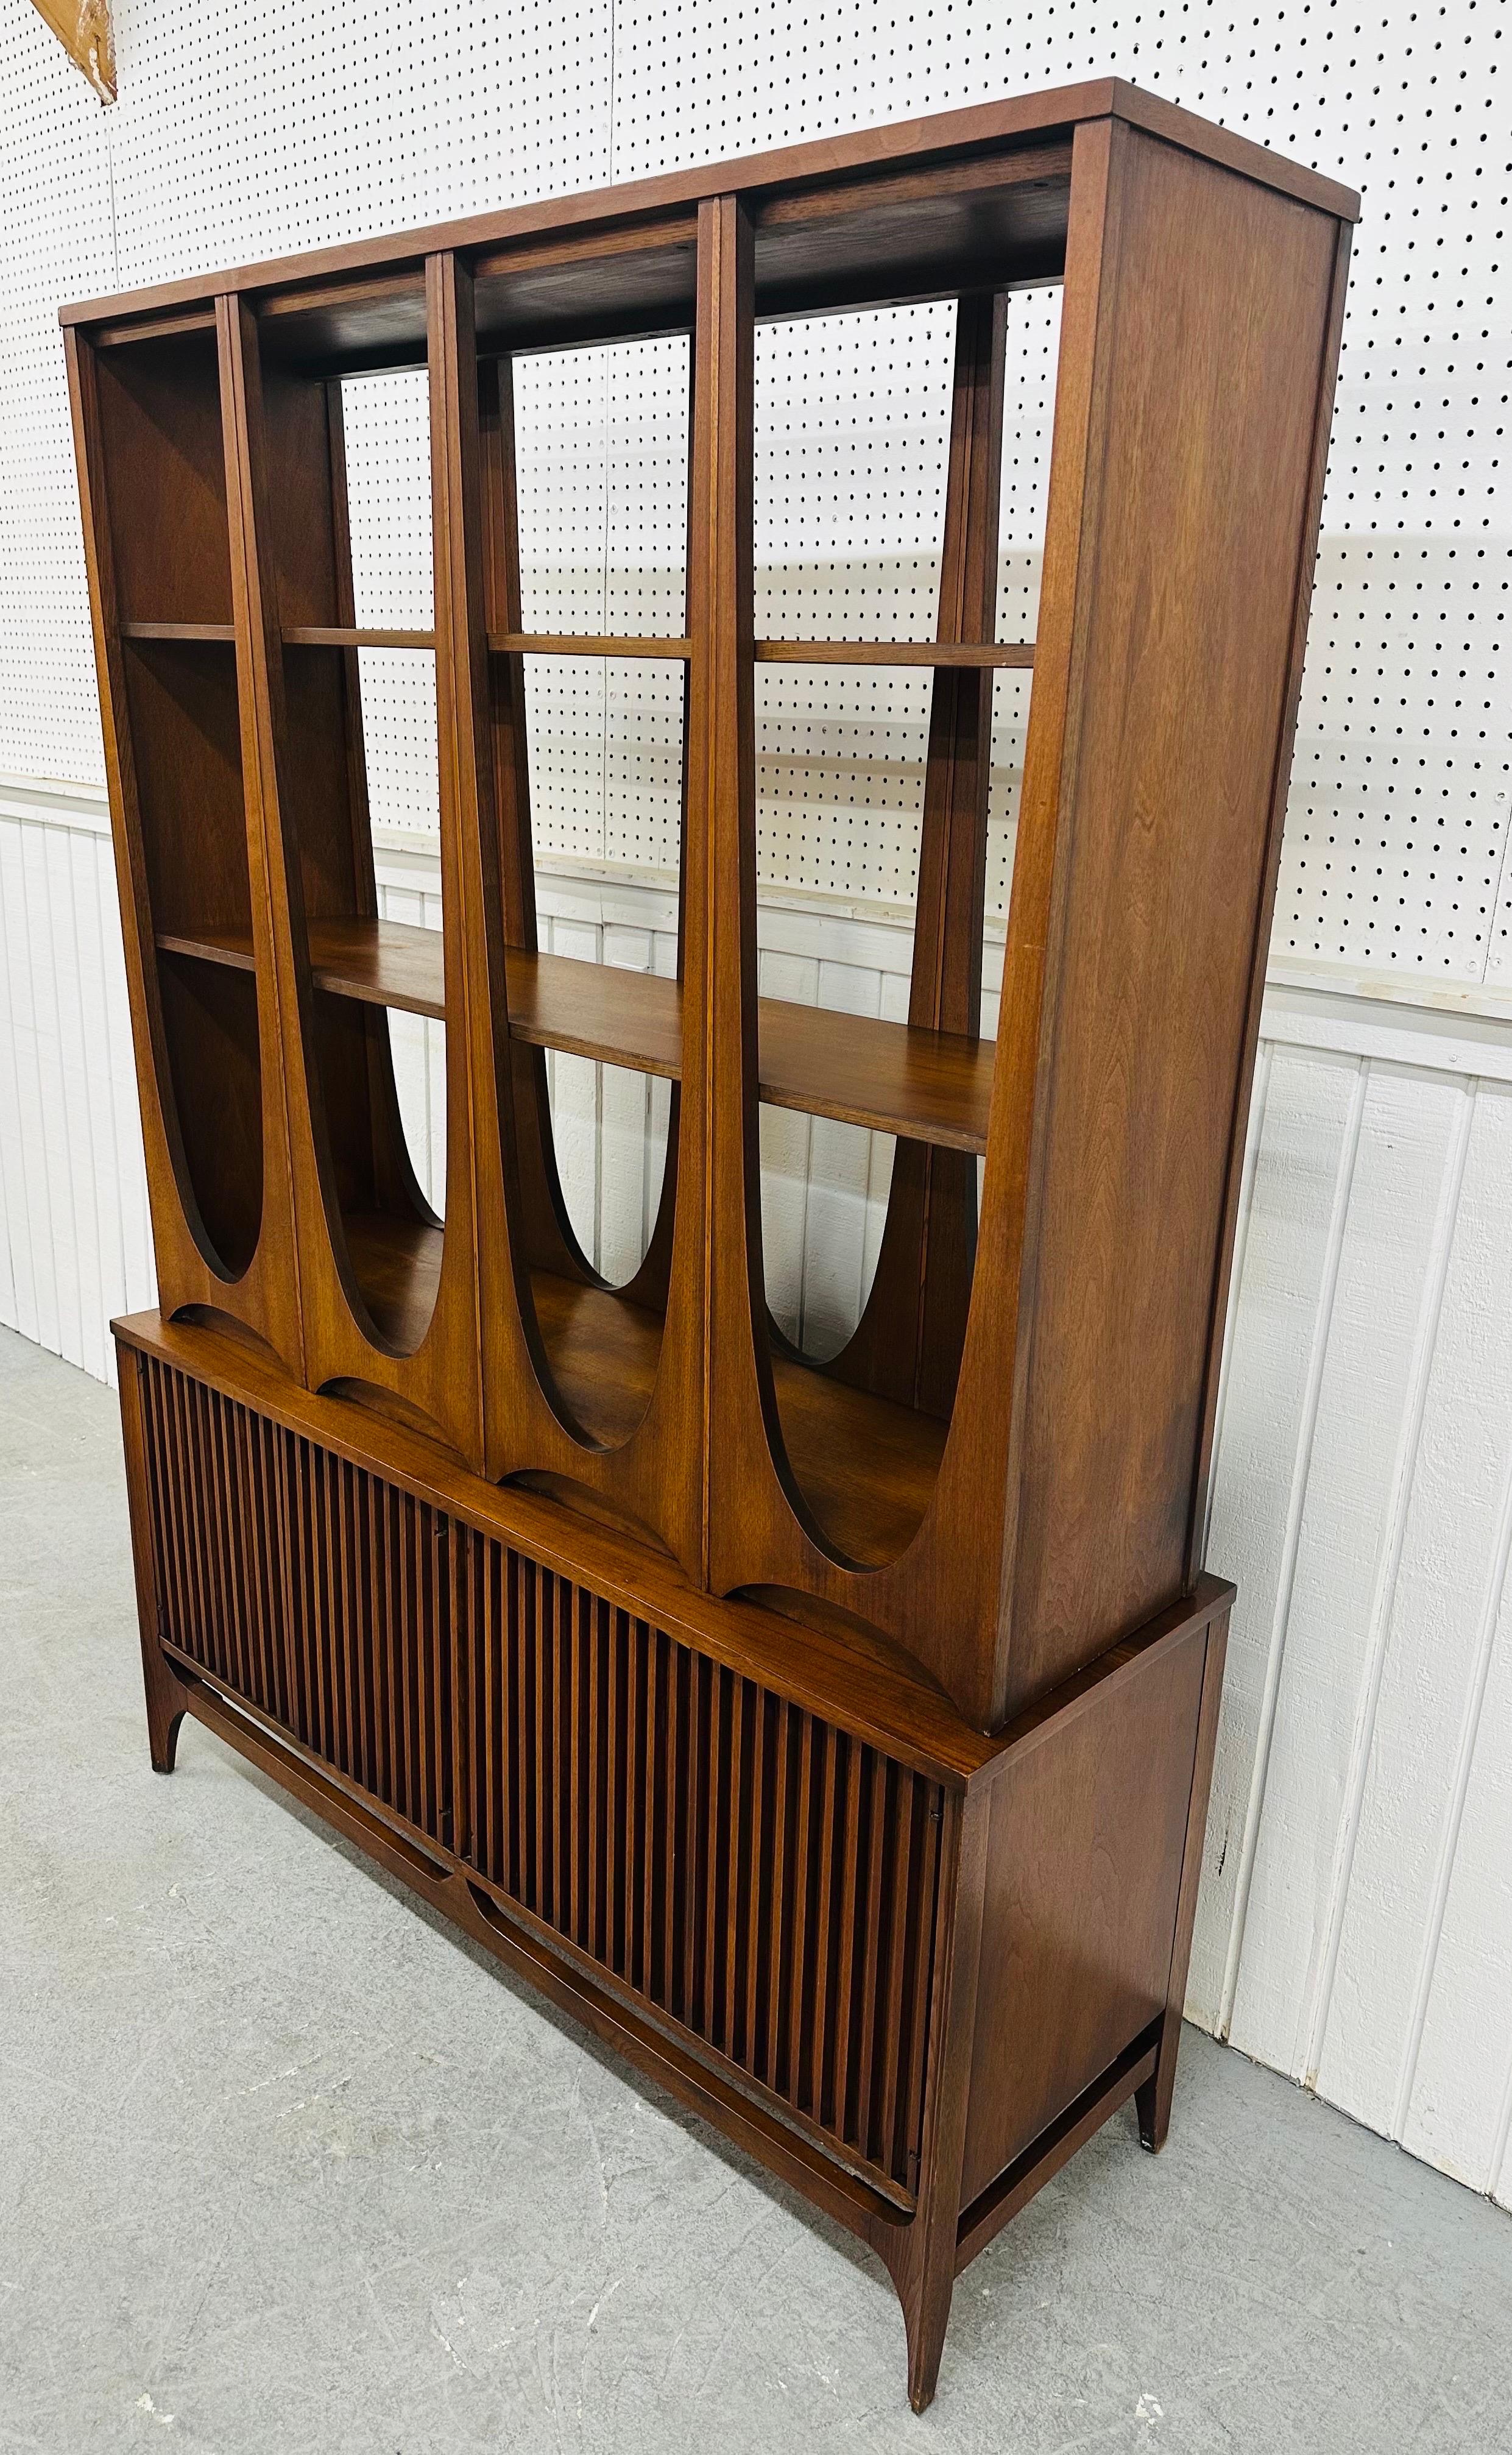 This listing is for a Mid-Century Modern Broyhill Brasilia Walnut Room Divider. This rare and iconic piece from the Broyhill Brasilia collection features a two-piece design finished on both sides in a beautiful walnut stain. The sculpted top sits on